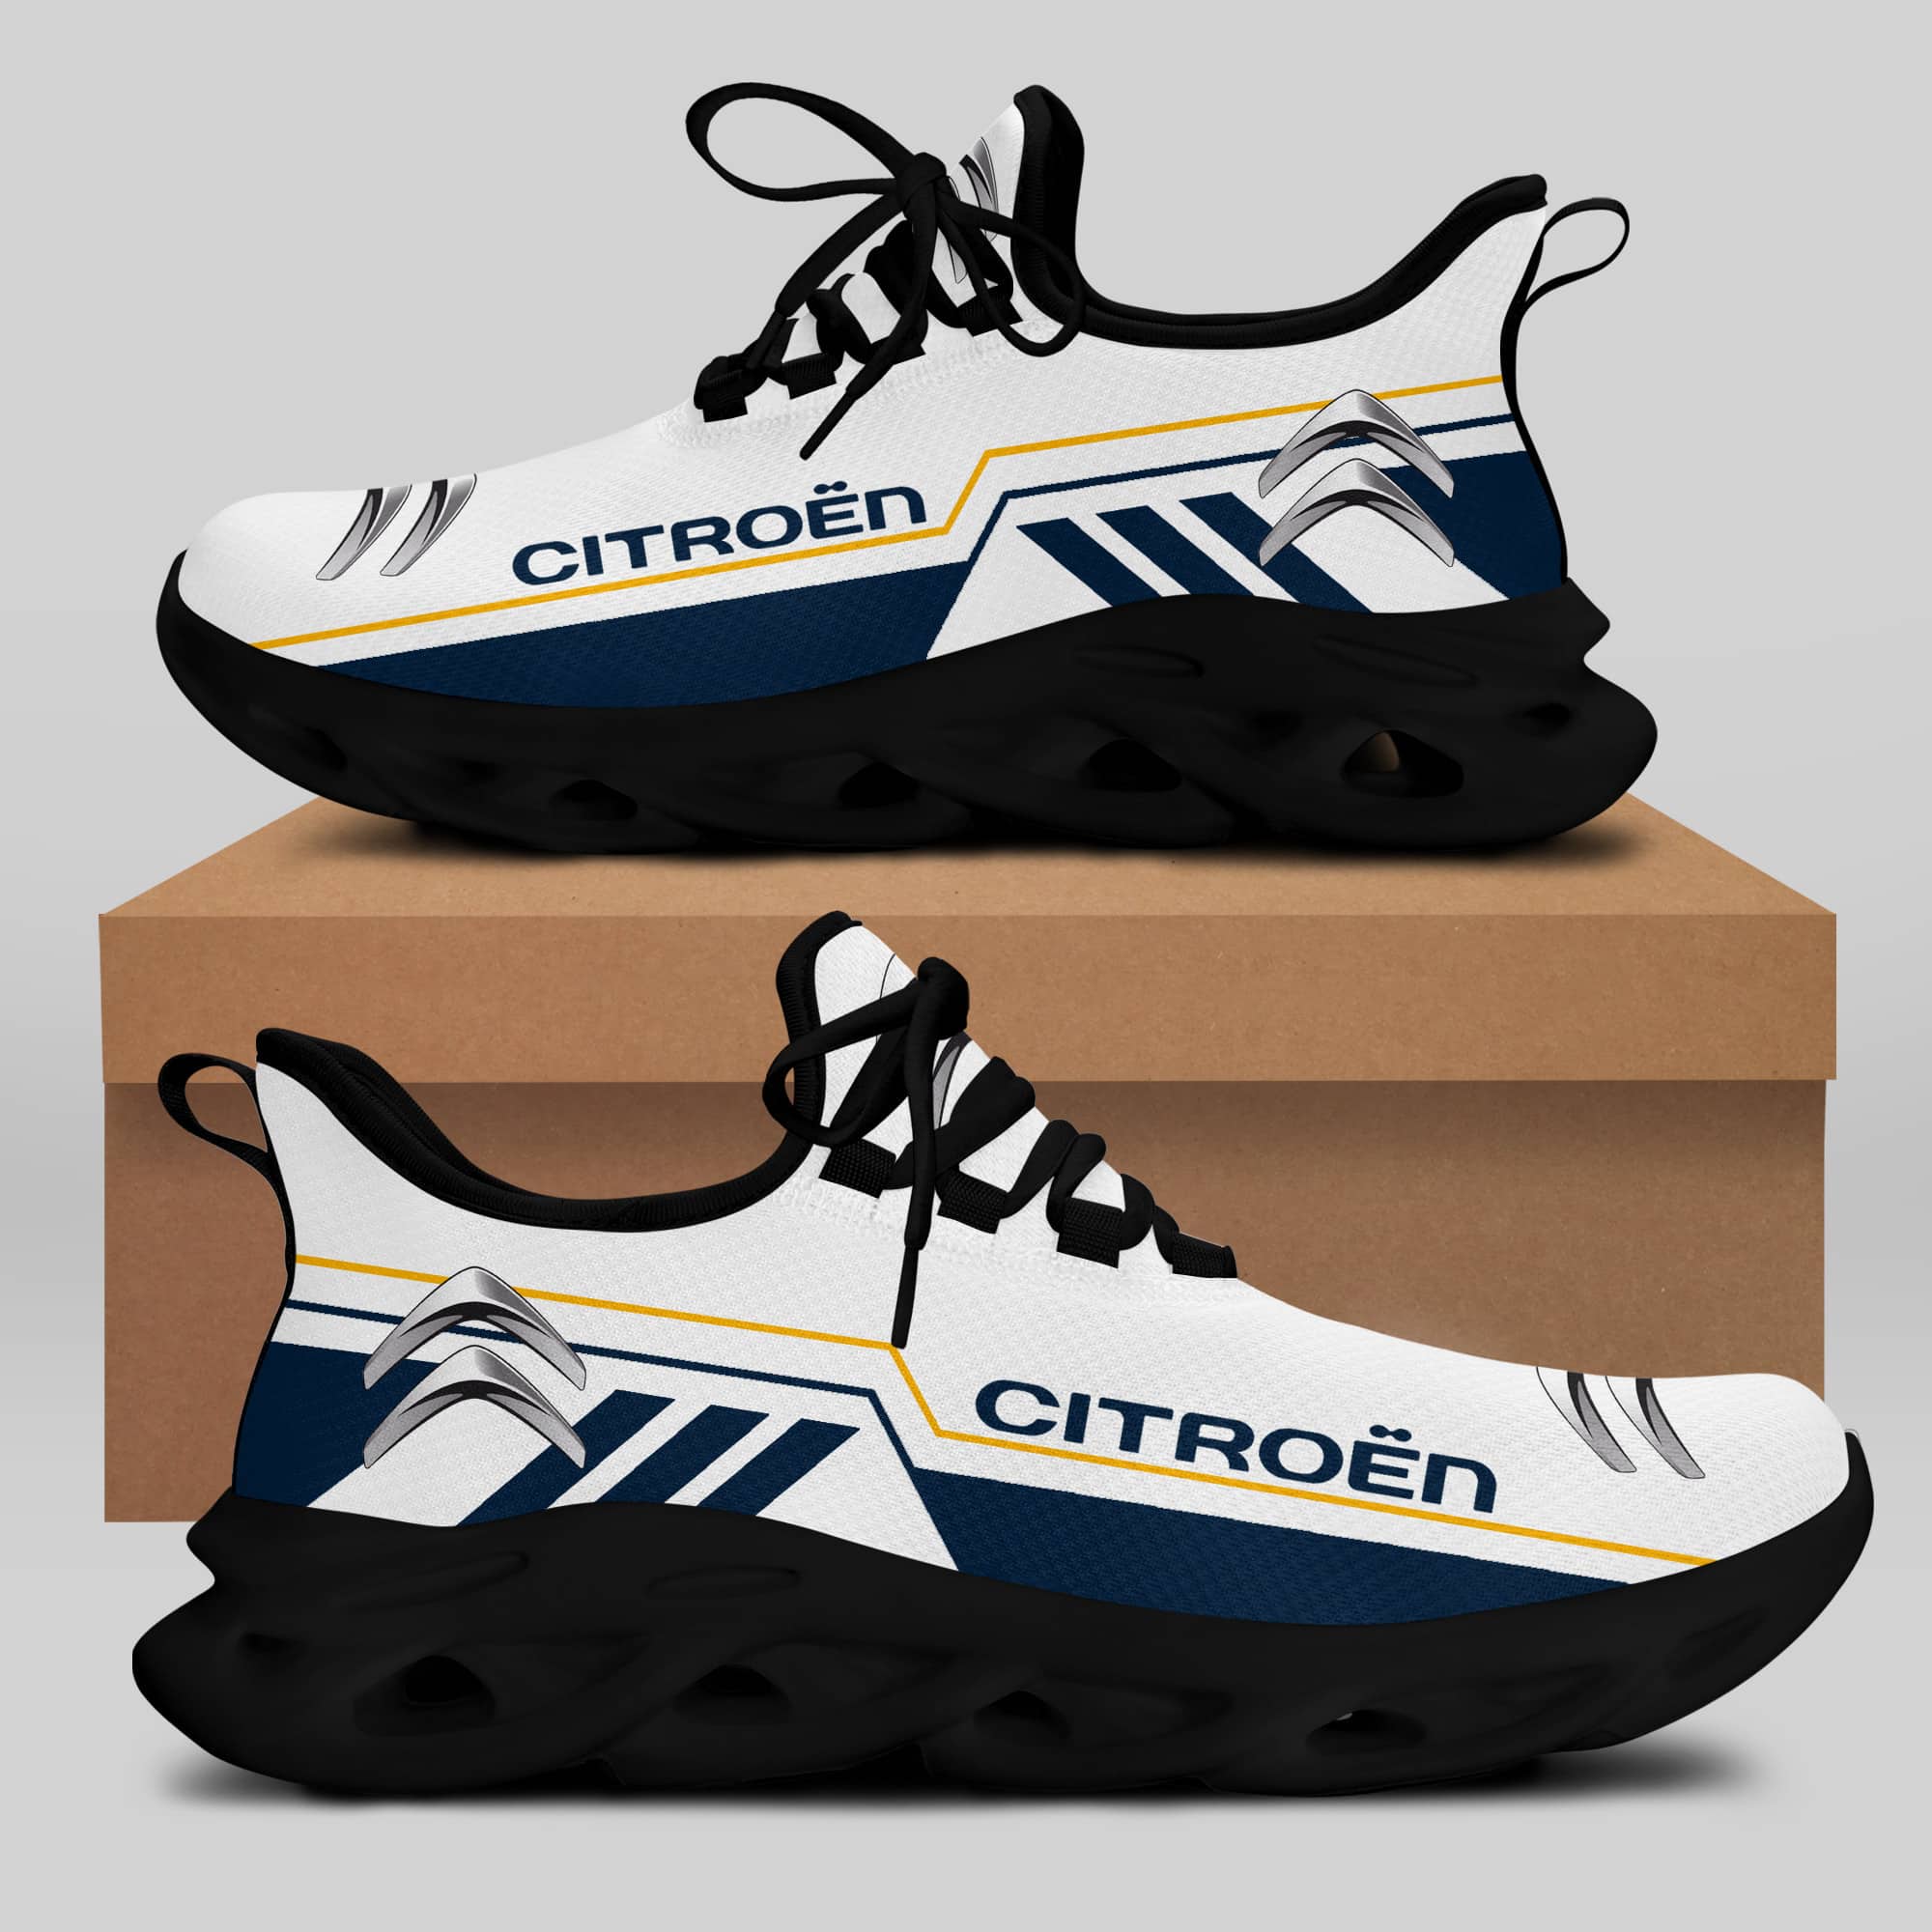 Citroën Running Shoes Max Soul Shoes Sneakers Ver 21 2